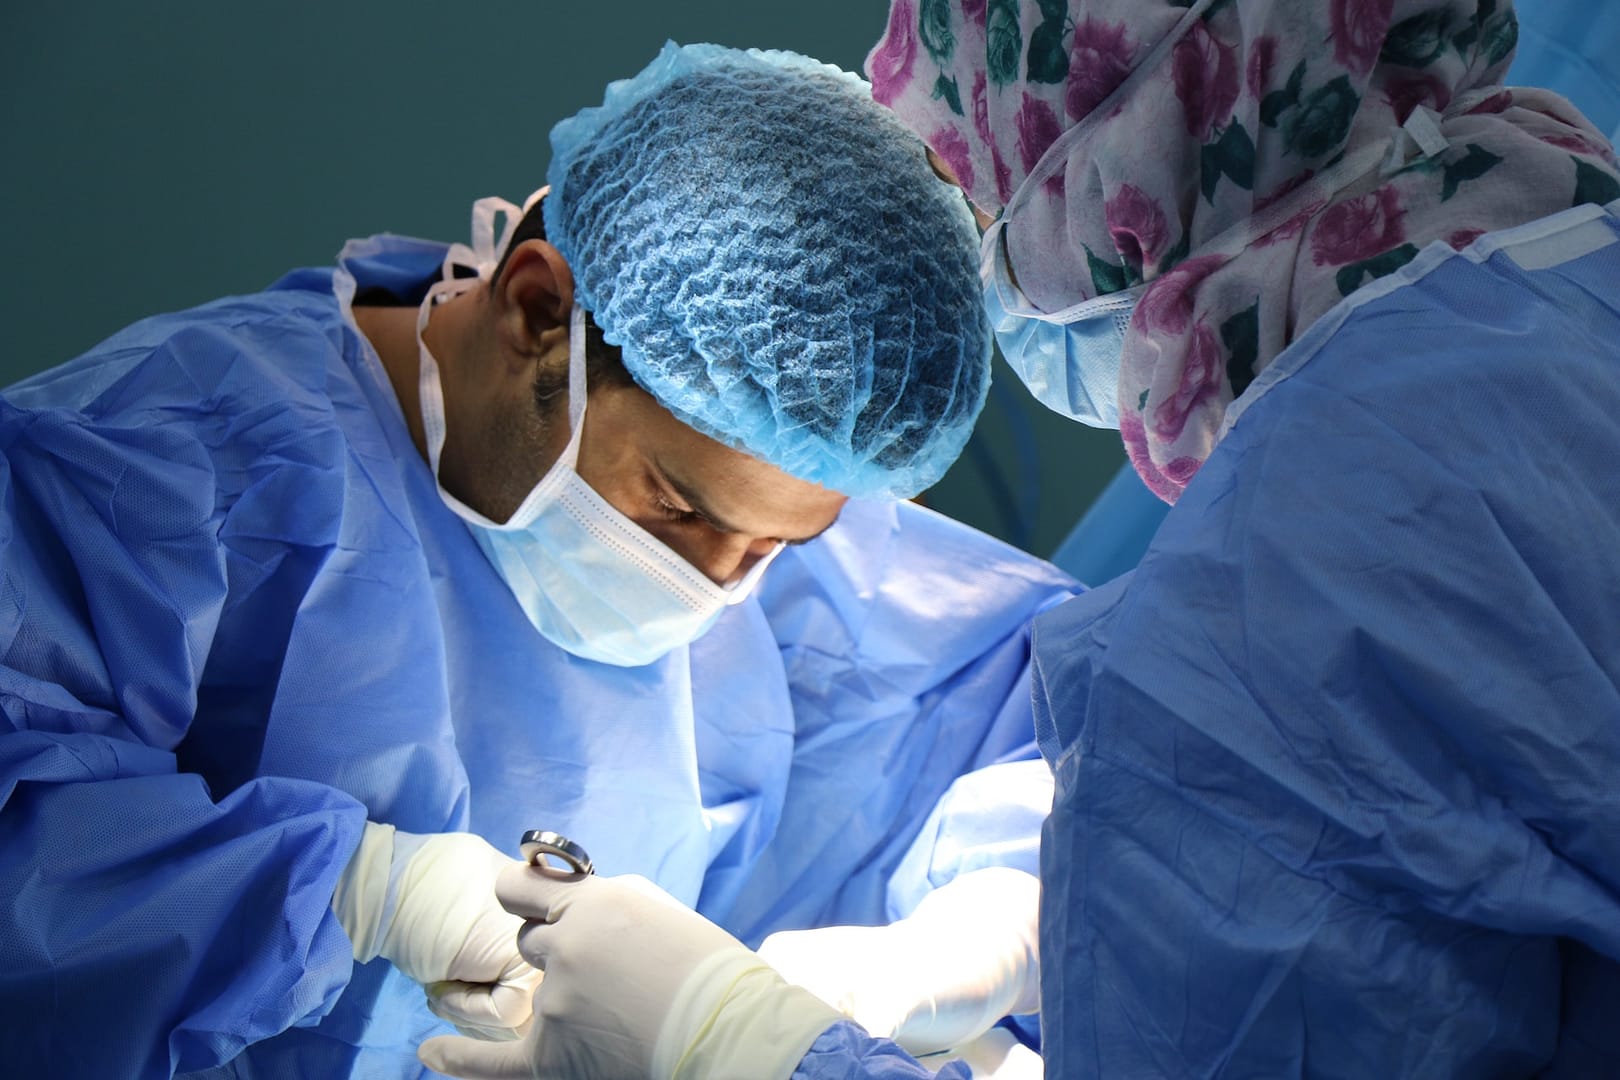 A doctor carrying out a surgery